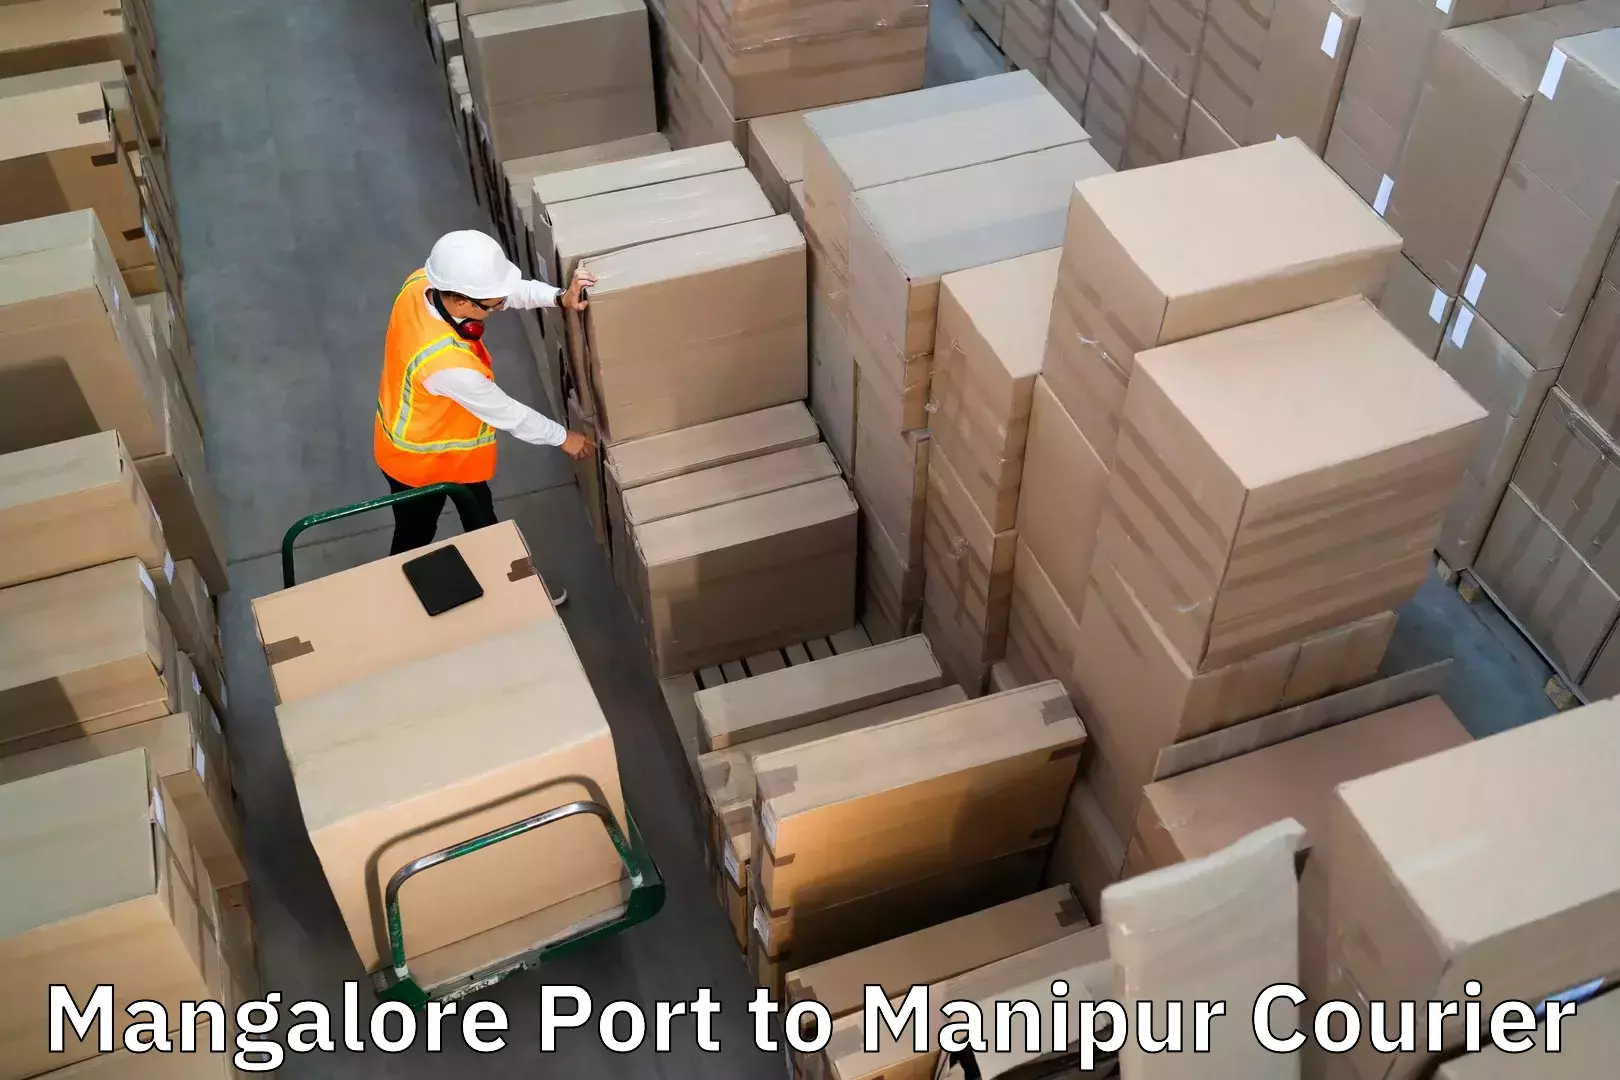 Luggage shipment specialists in Mangalore Port to Imphal